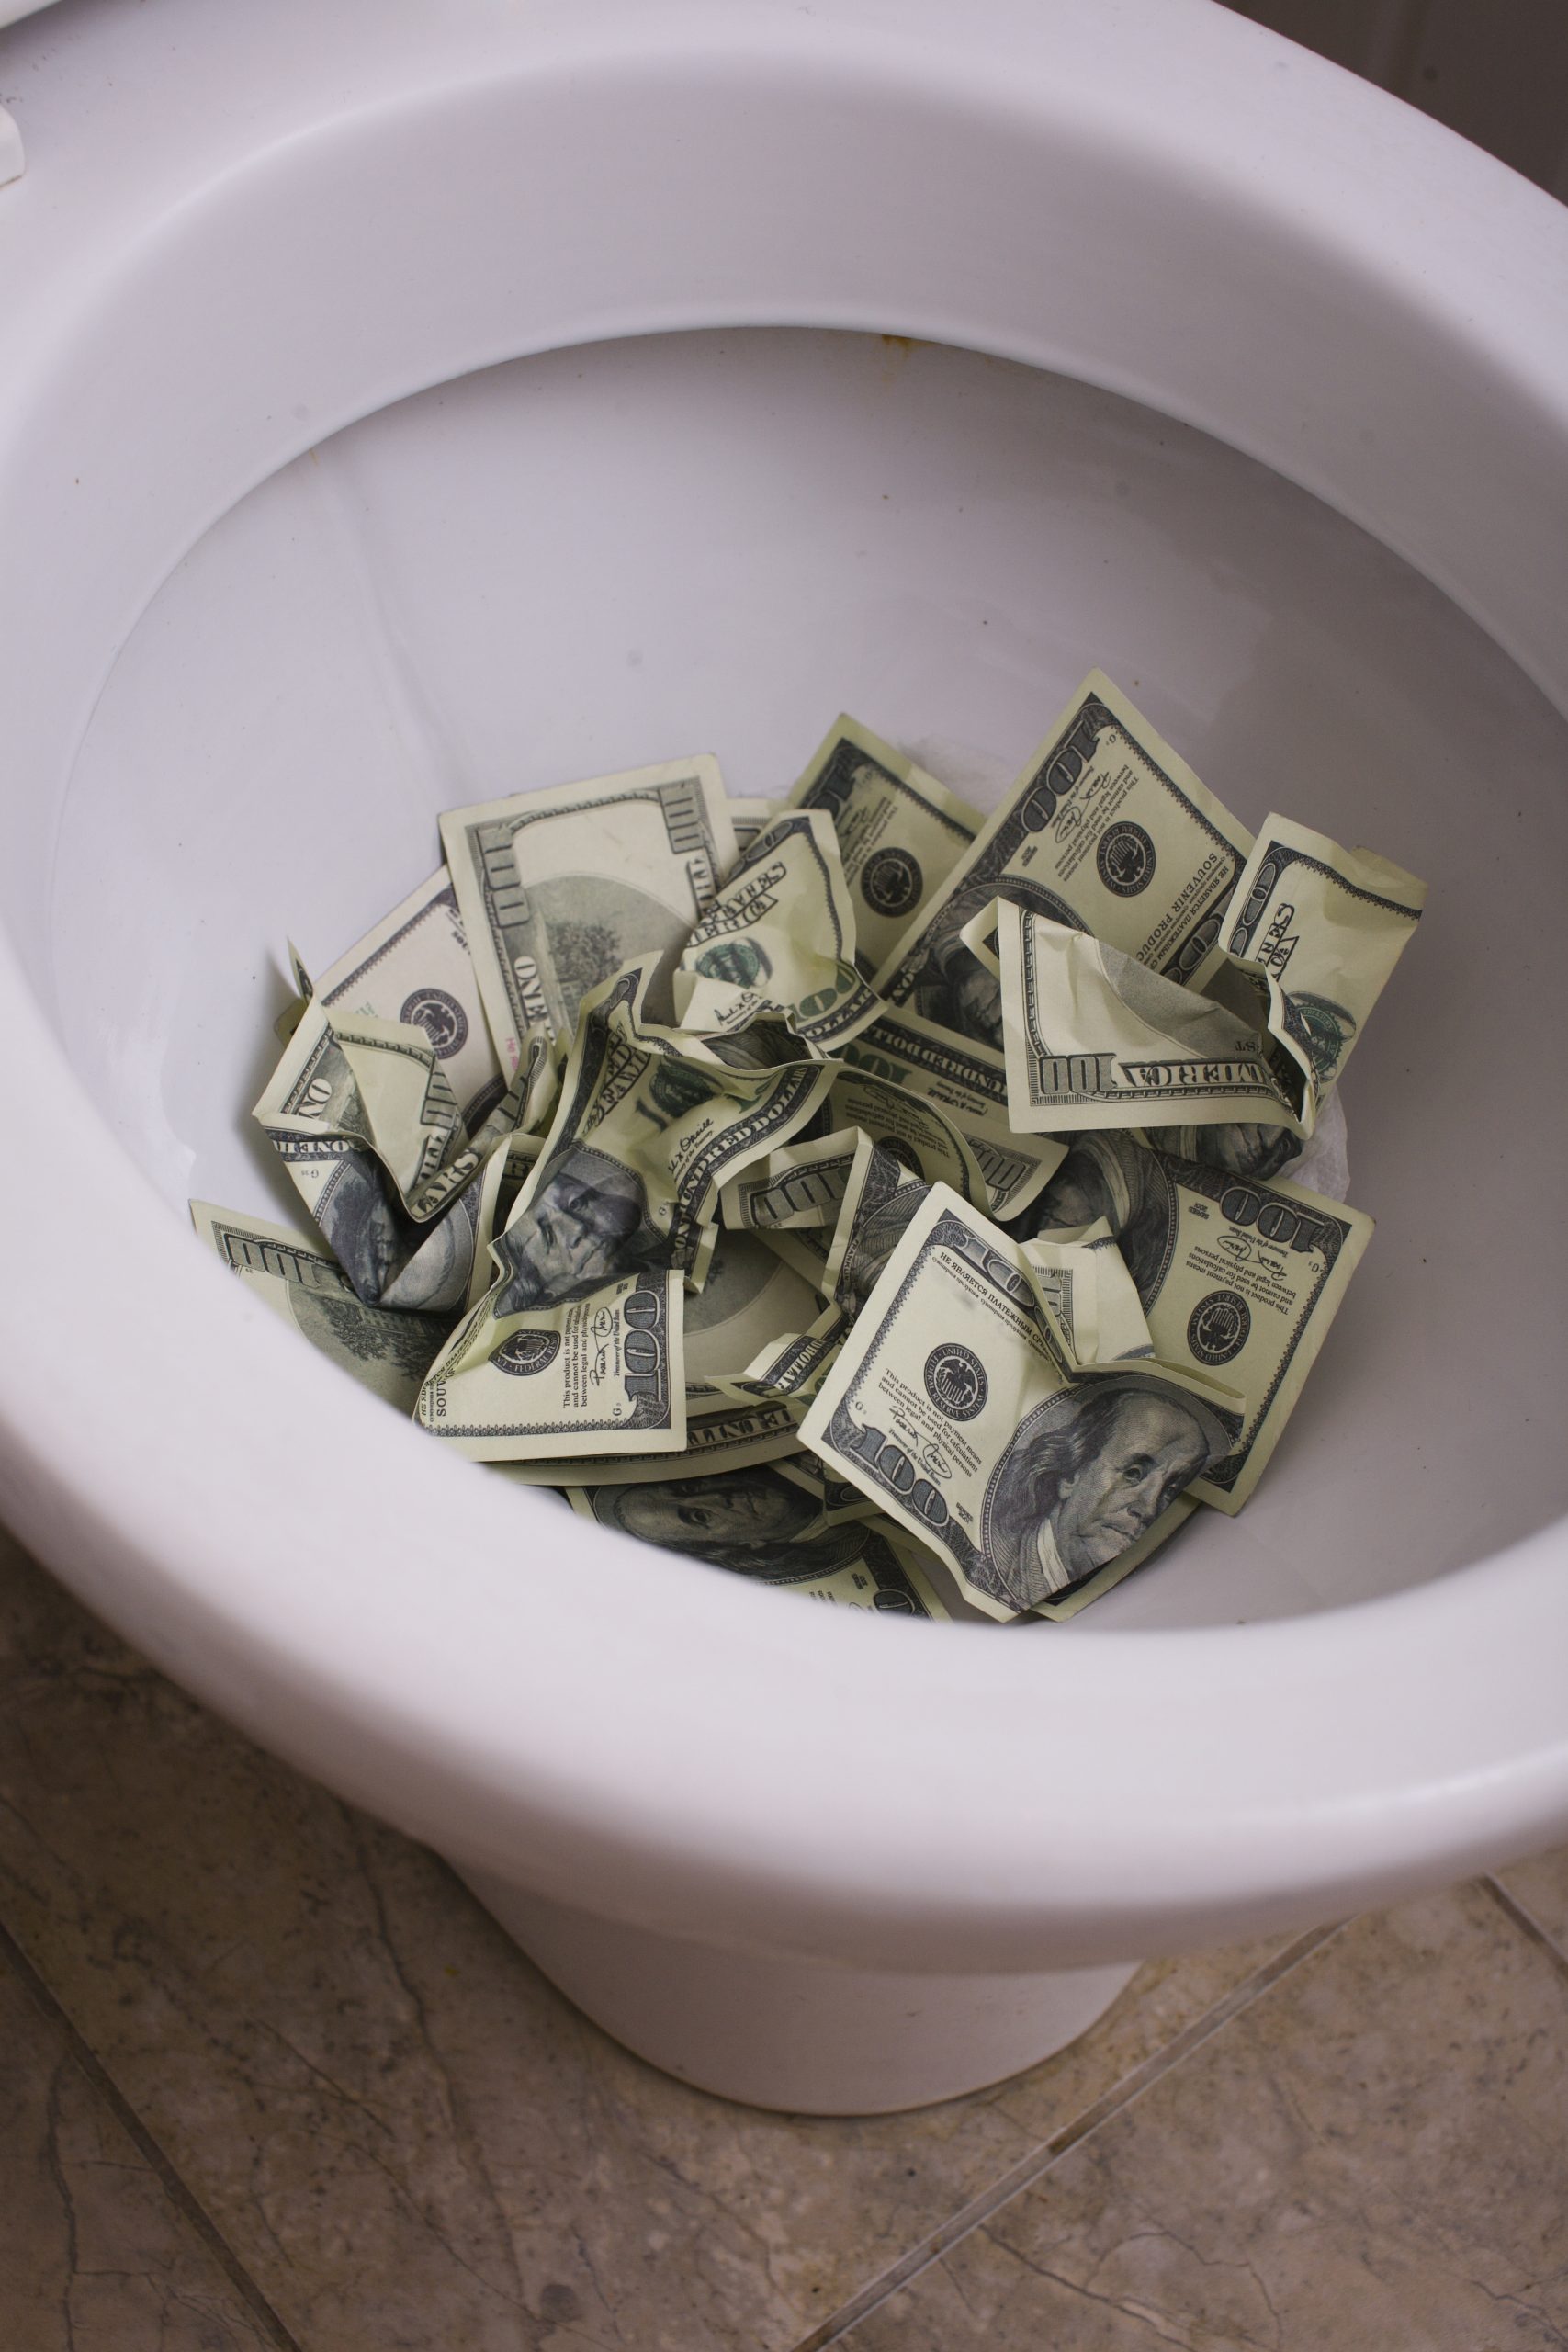 dirty toilet with money close up, lot of cash useless